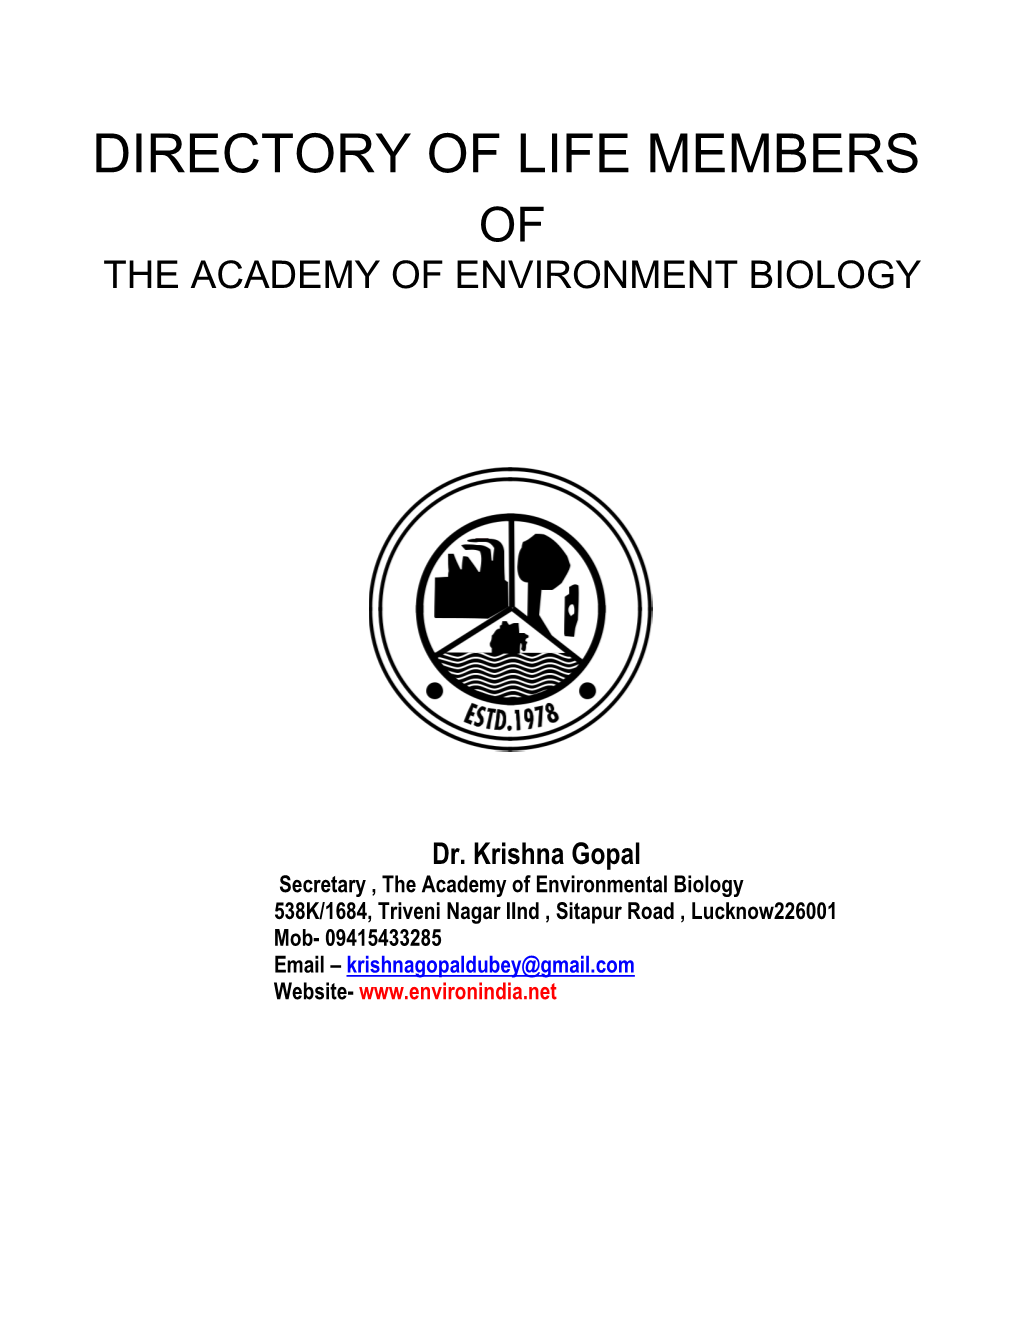 Directory of Life Members of the Academy of Environment Biology